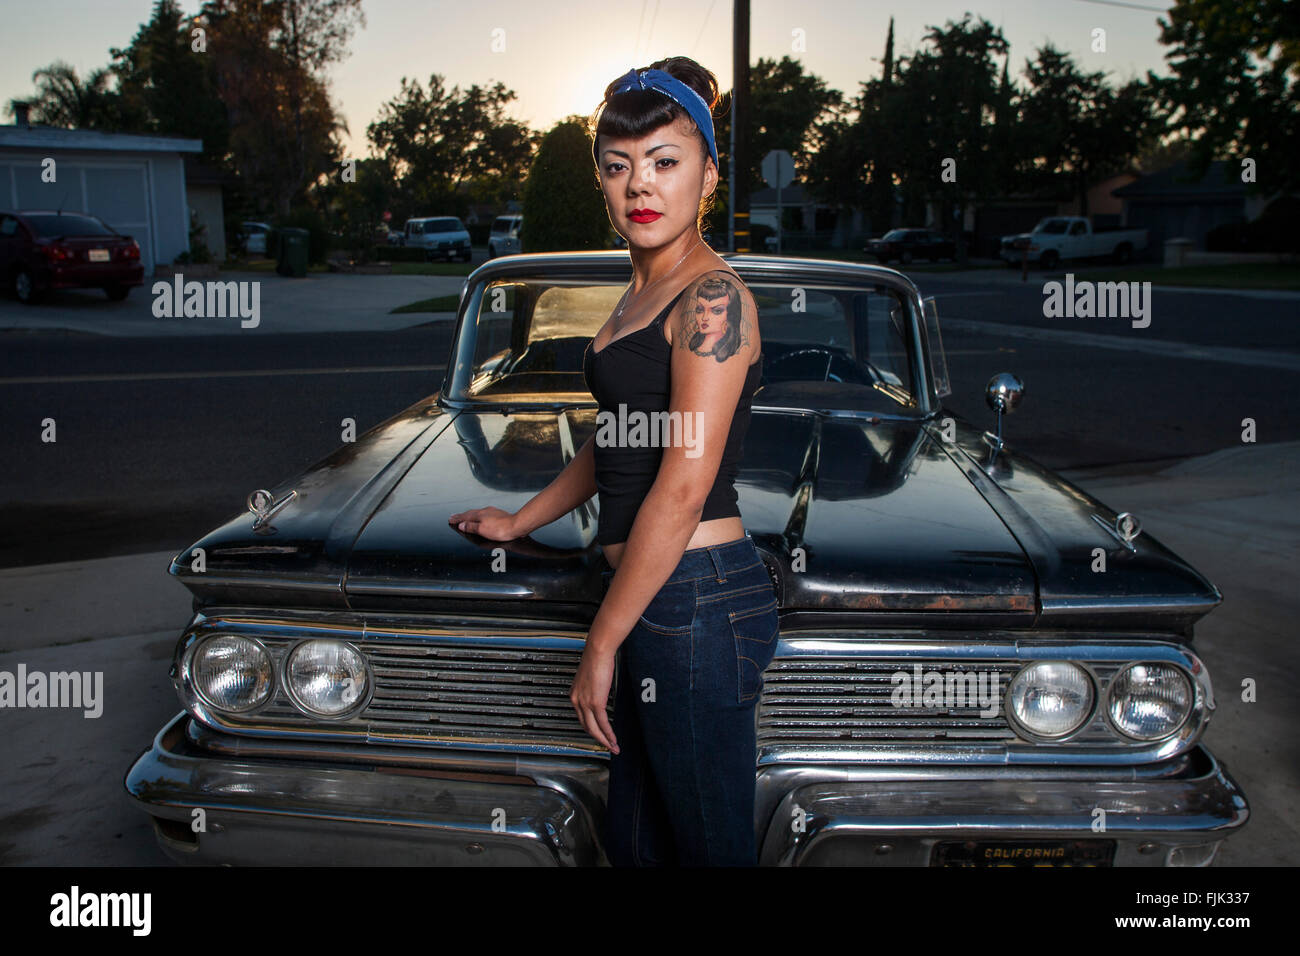 LOS ANGELES, CA – JUNE 29: Latina’s of the L.A. based car club 'The Black Widows' in Los Angeles, California on June 29, 2005. Stock Photo